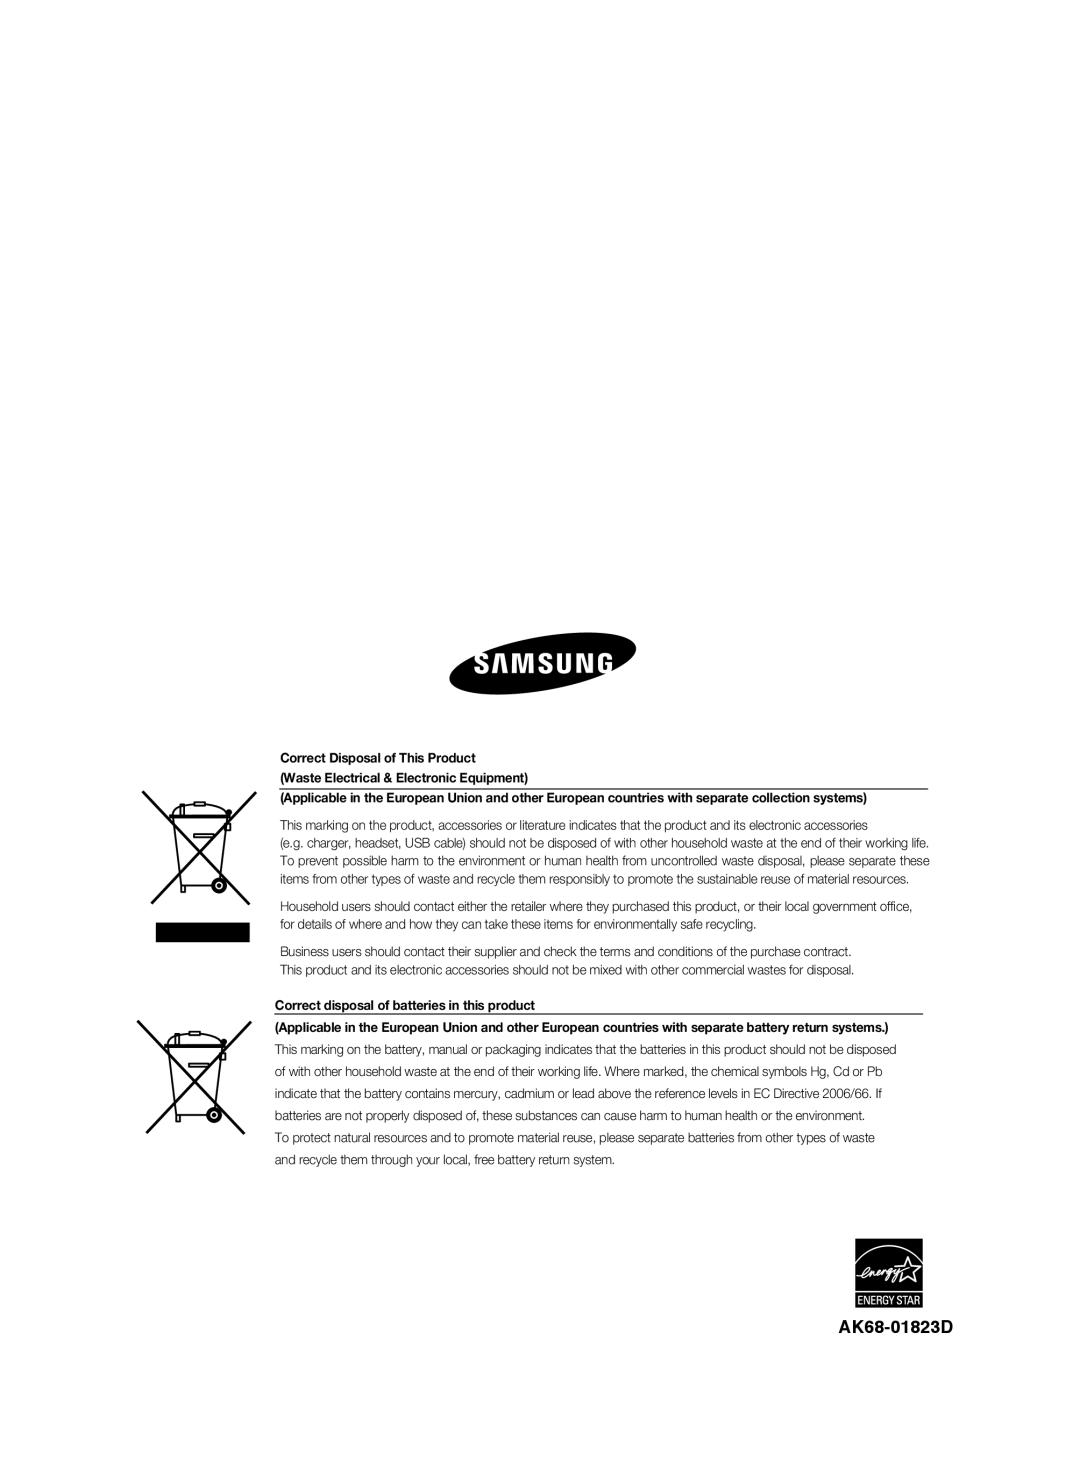 Samsung DVD-1080P9/EDC manual AK68-01823D, Correct Disposal of This Product, Waste Electrical & Electronic Equipment 